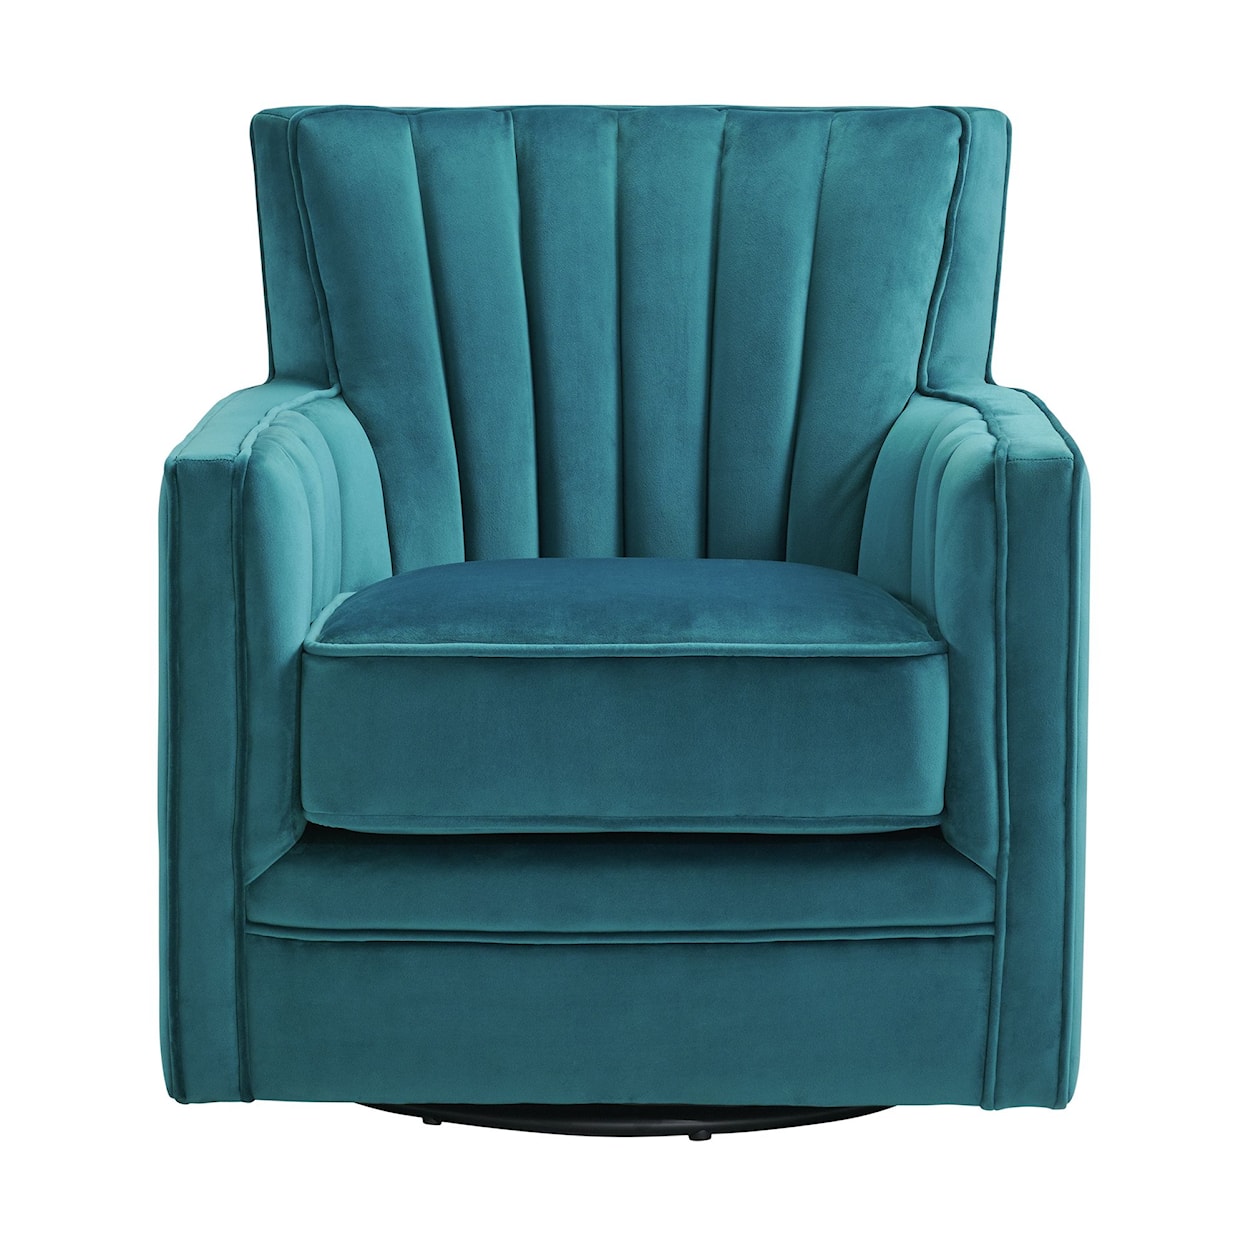 Elements International Loden Upholstered Swivel Accent Chair